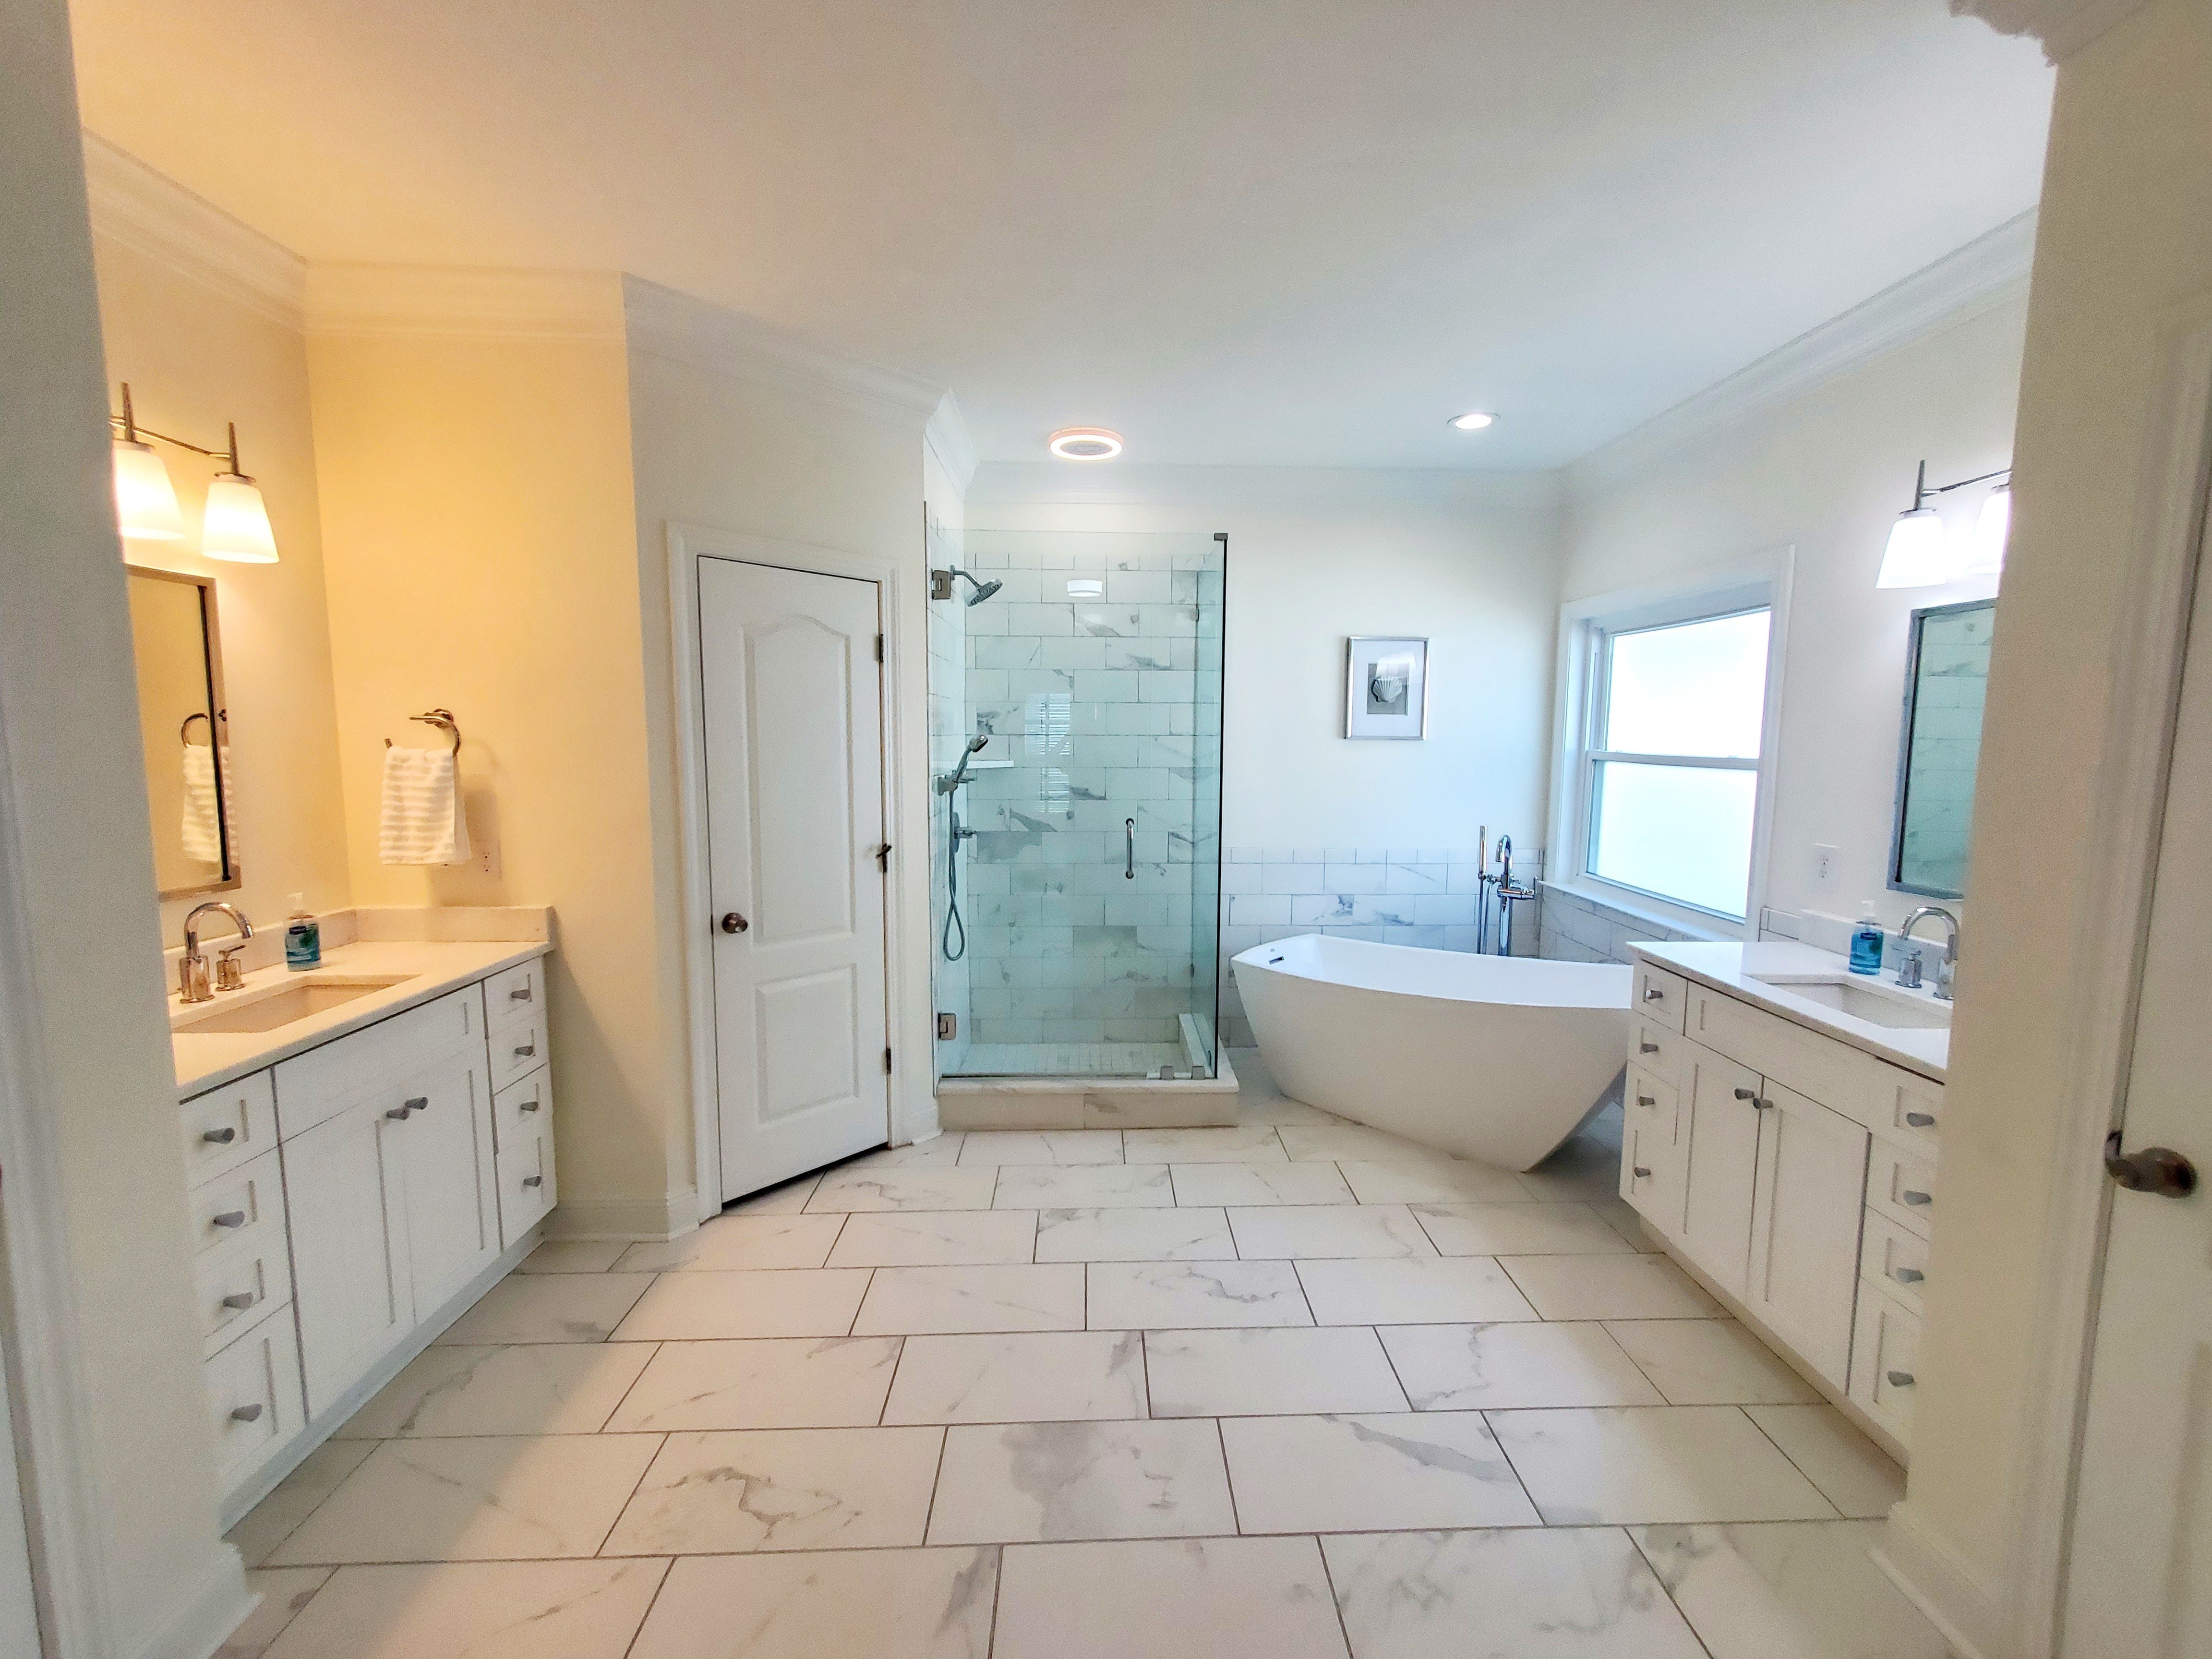 Newly remodeled master bath with Bluetooth in shower